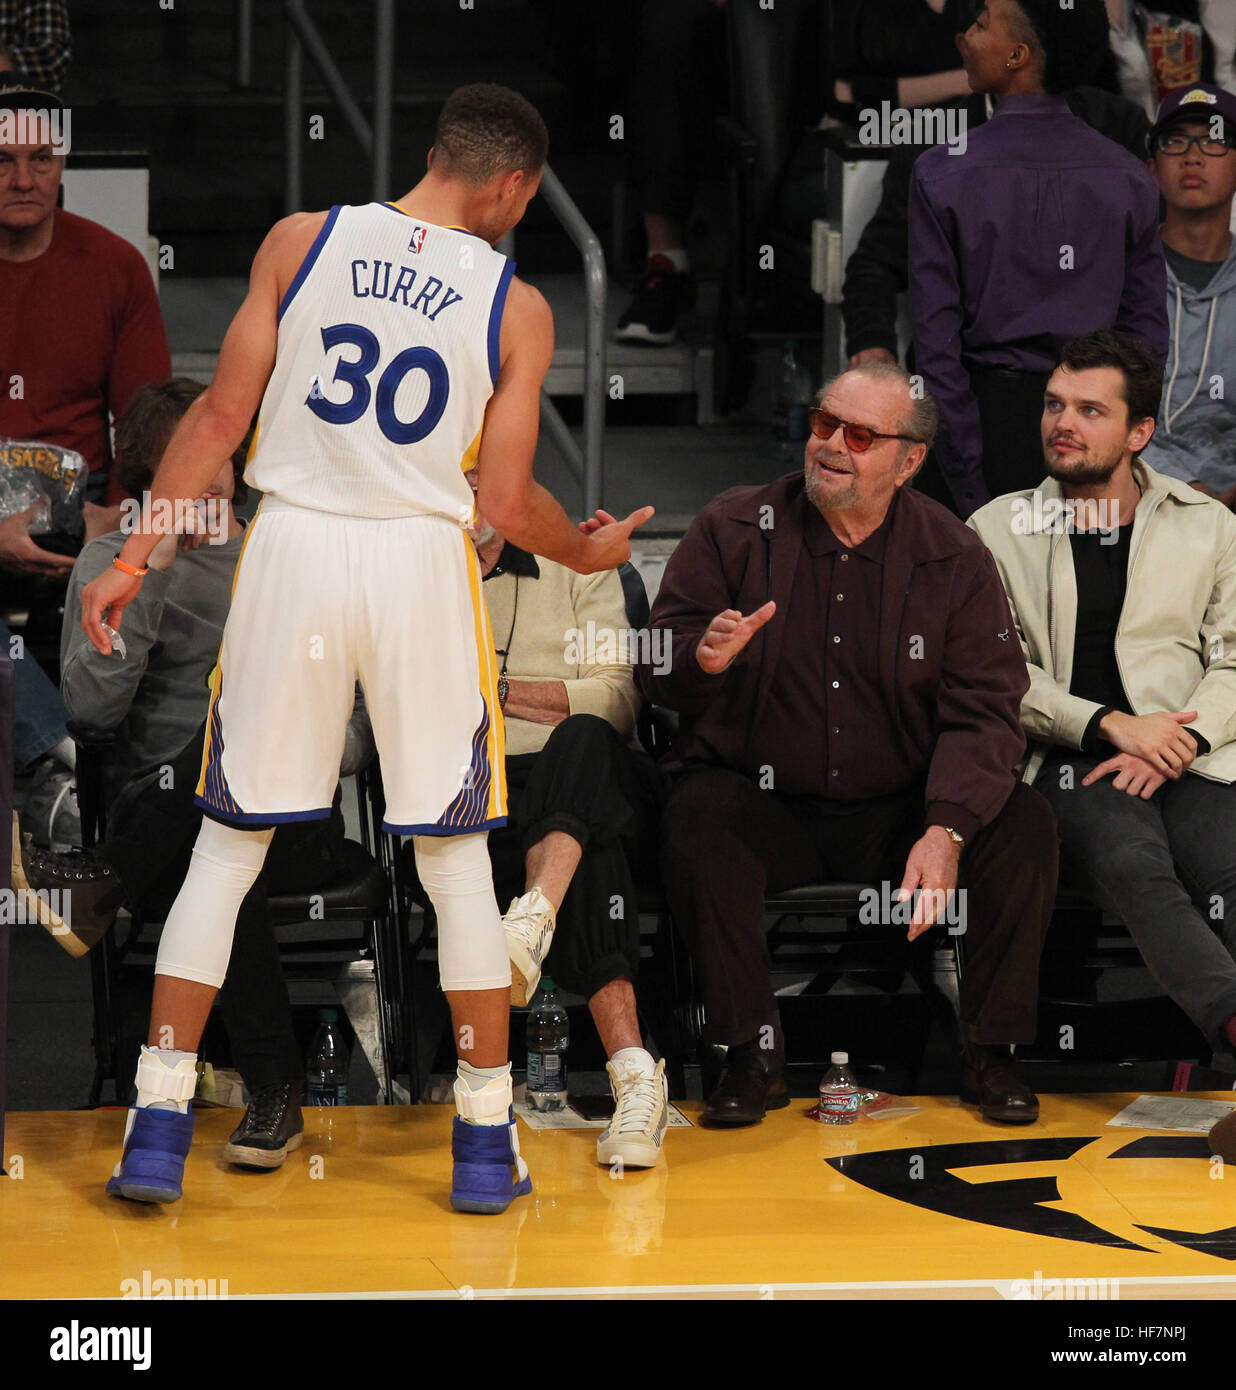 Celebrities at the Los Angeles Lakers game. The Golden State Warriors defeated the Los Angeles Lakers by the final score of 109-85 at the Staples Center in Los Angeles  Featuring: Jack Nicholson, Raymond Nicholson Where: Los Angeles, California, United St Stock Photo